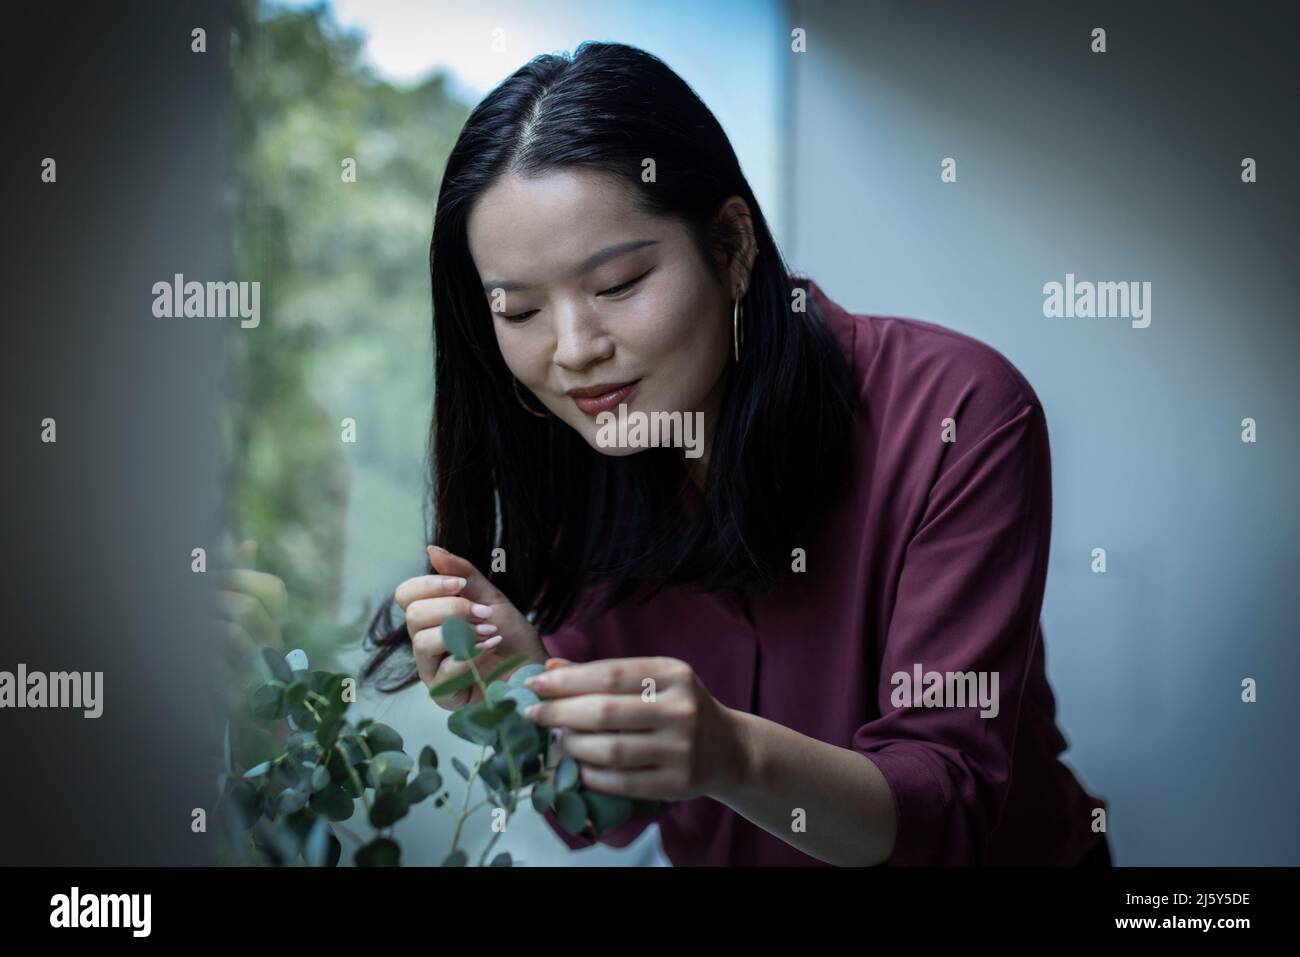 Young woman inspecting leaves on houseplant Stock Photo